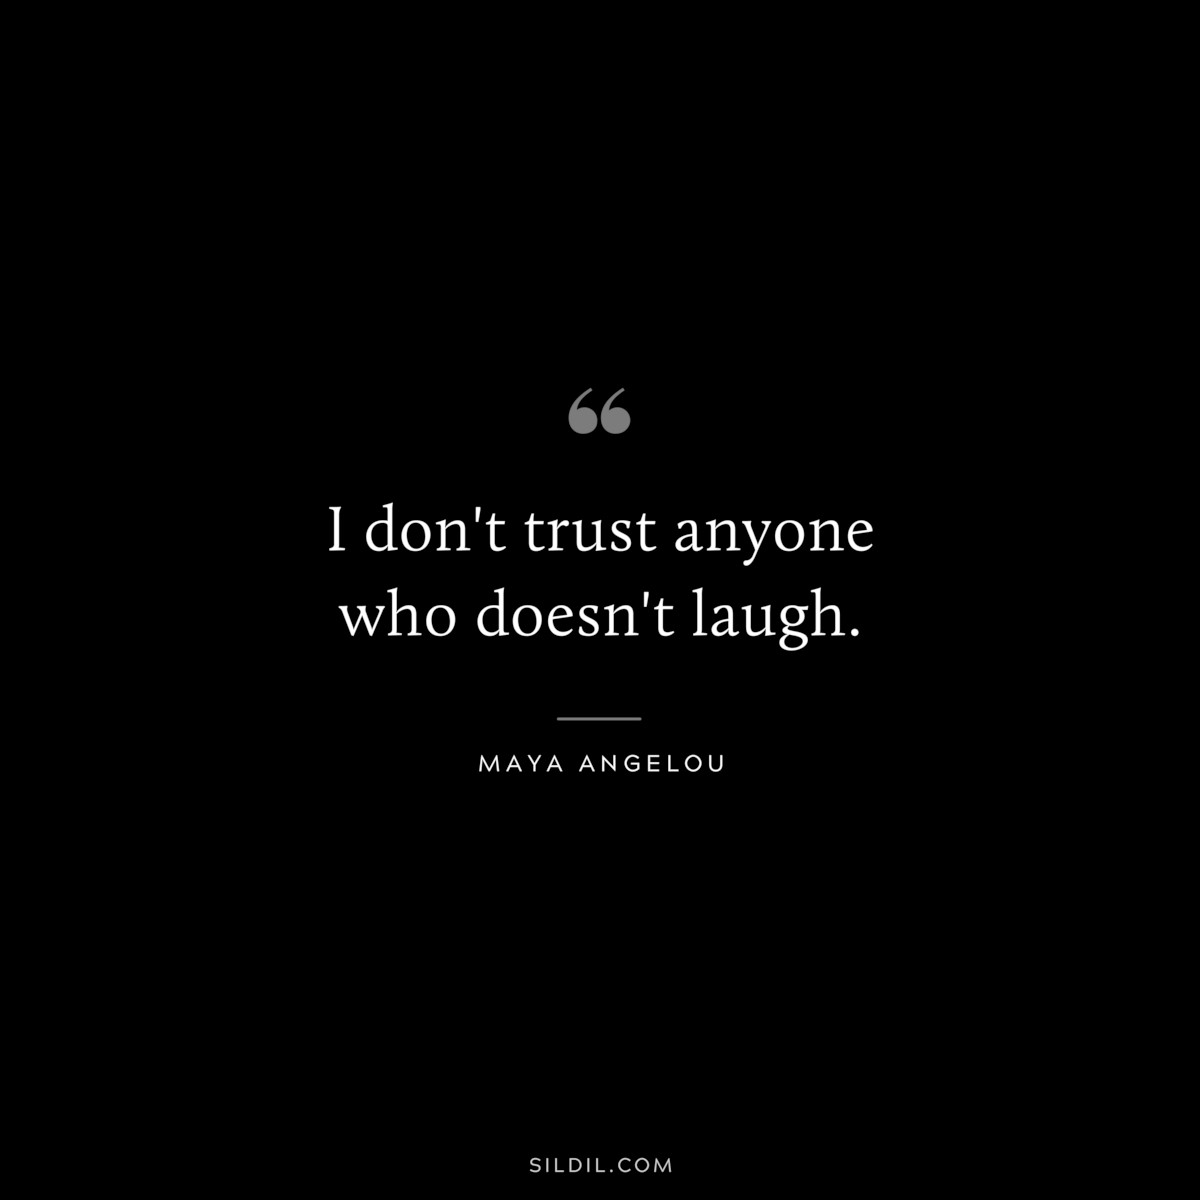 I don't trust anyone who doesn't laugh. ― Maya Angelou